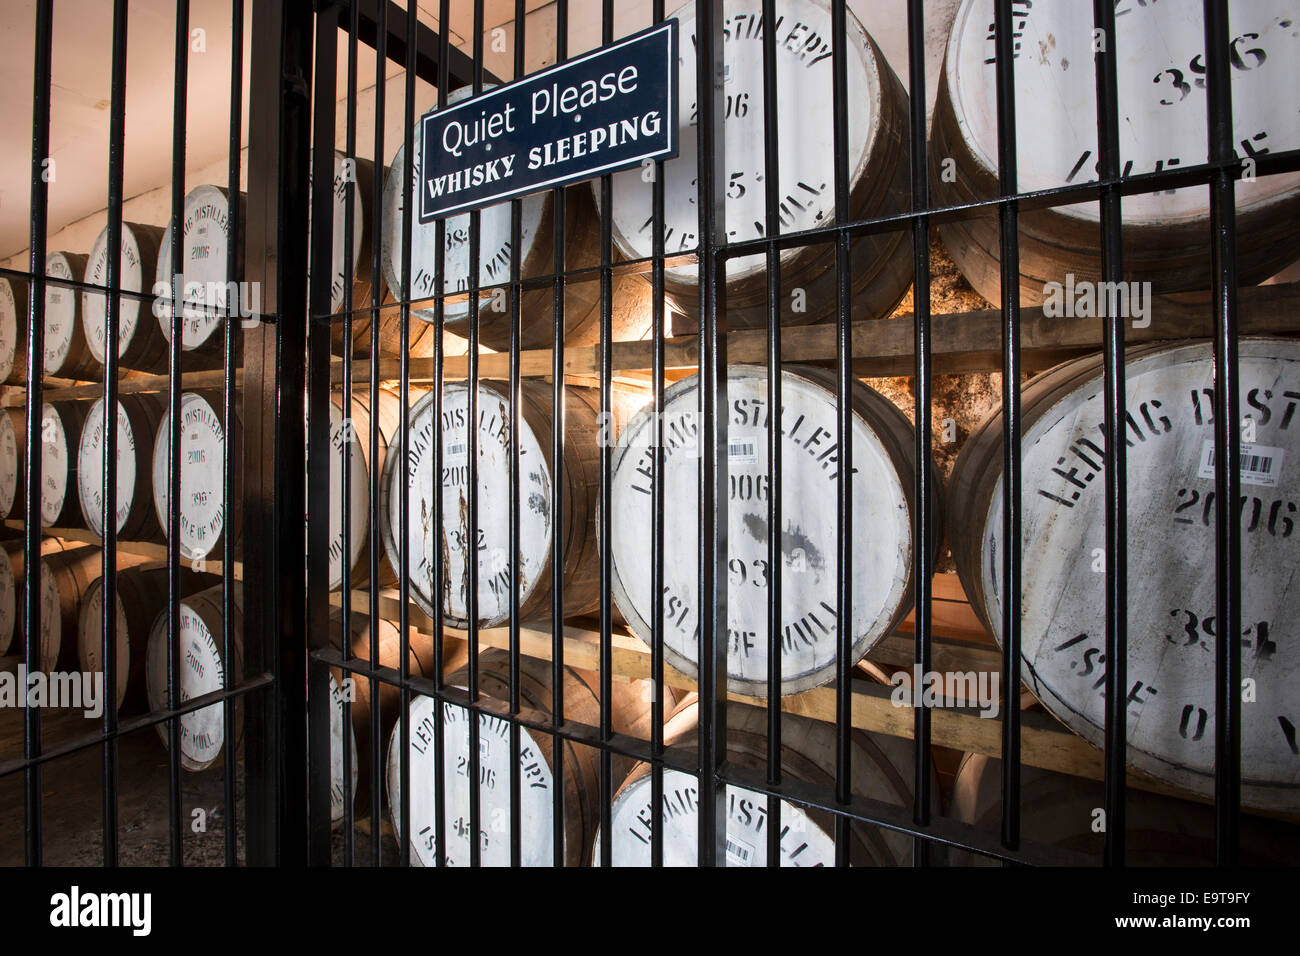 Single Malt Whisky, Ledaig, maturation process in oak casks in secure bonded warehouse storage at Tobermory Distillery on the Is Stock Photo